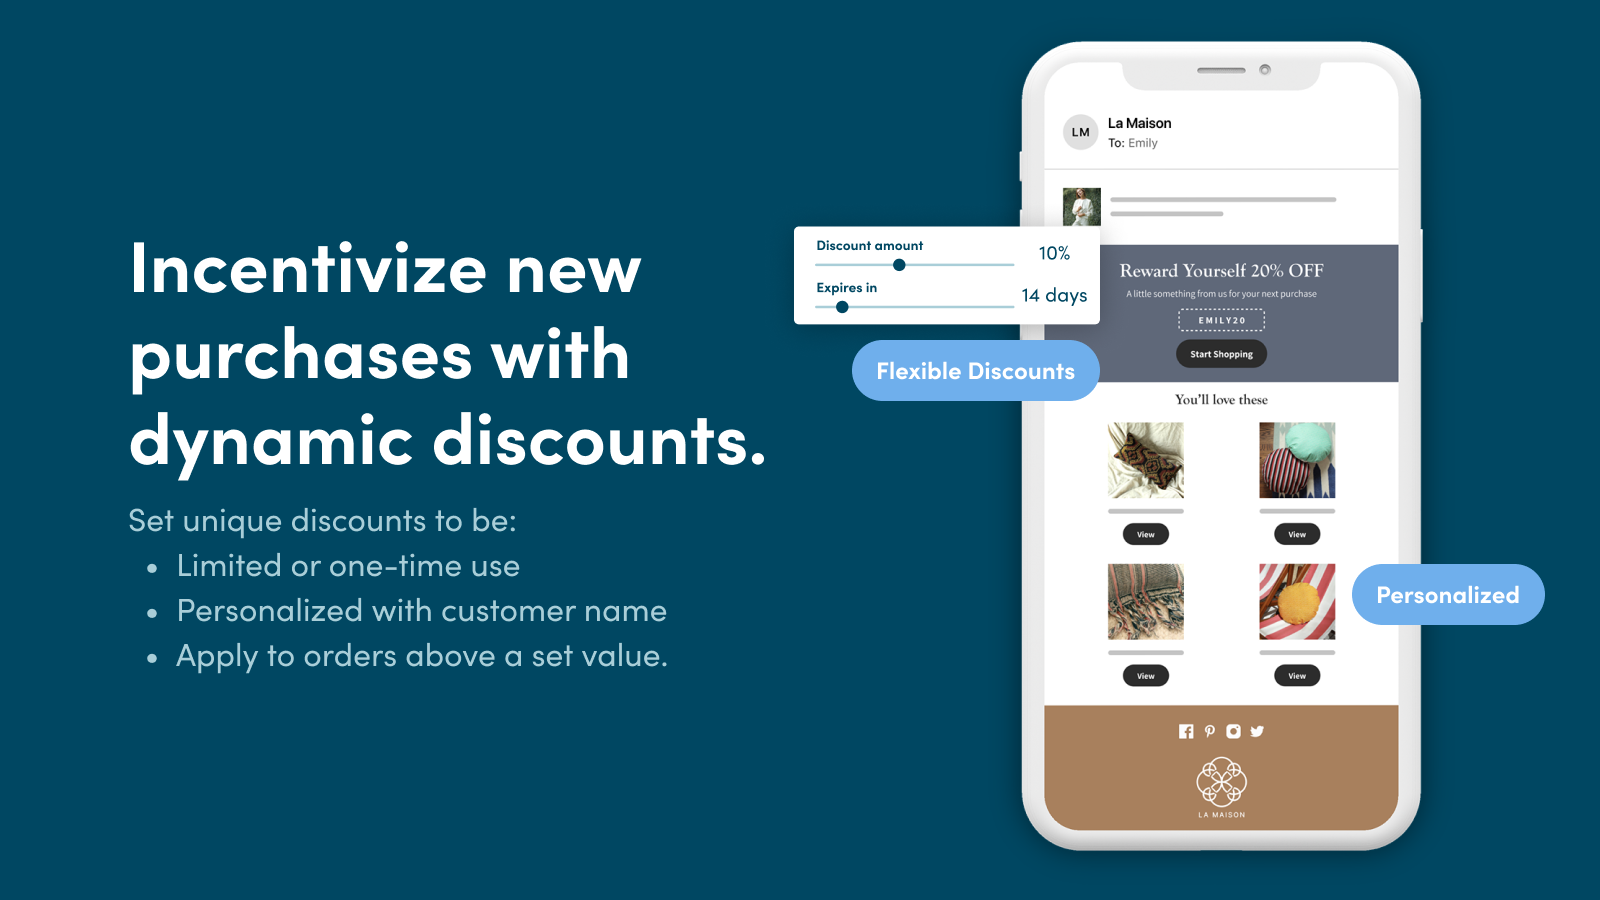 Incentivize new purchases with dynamic discounts.